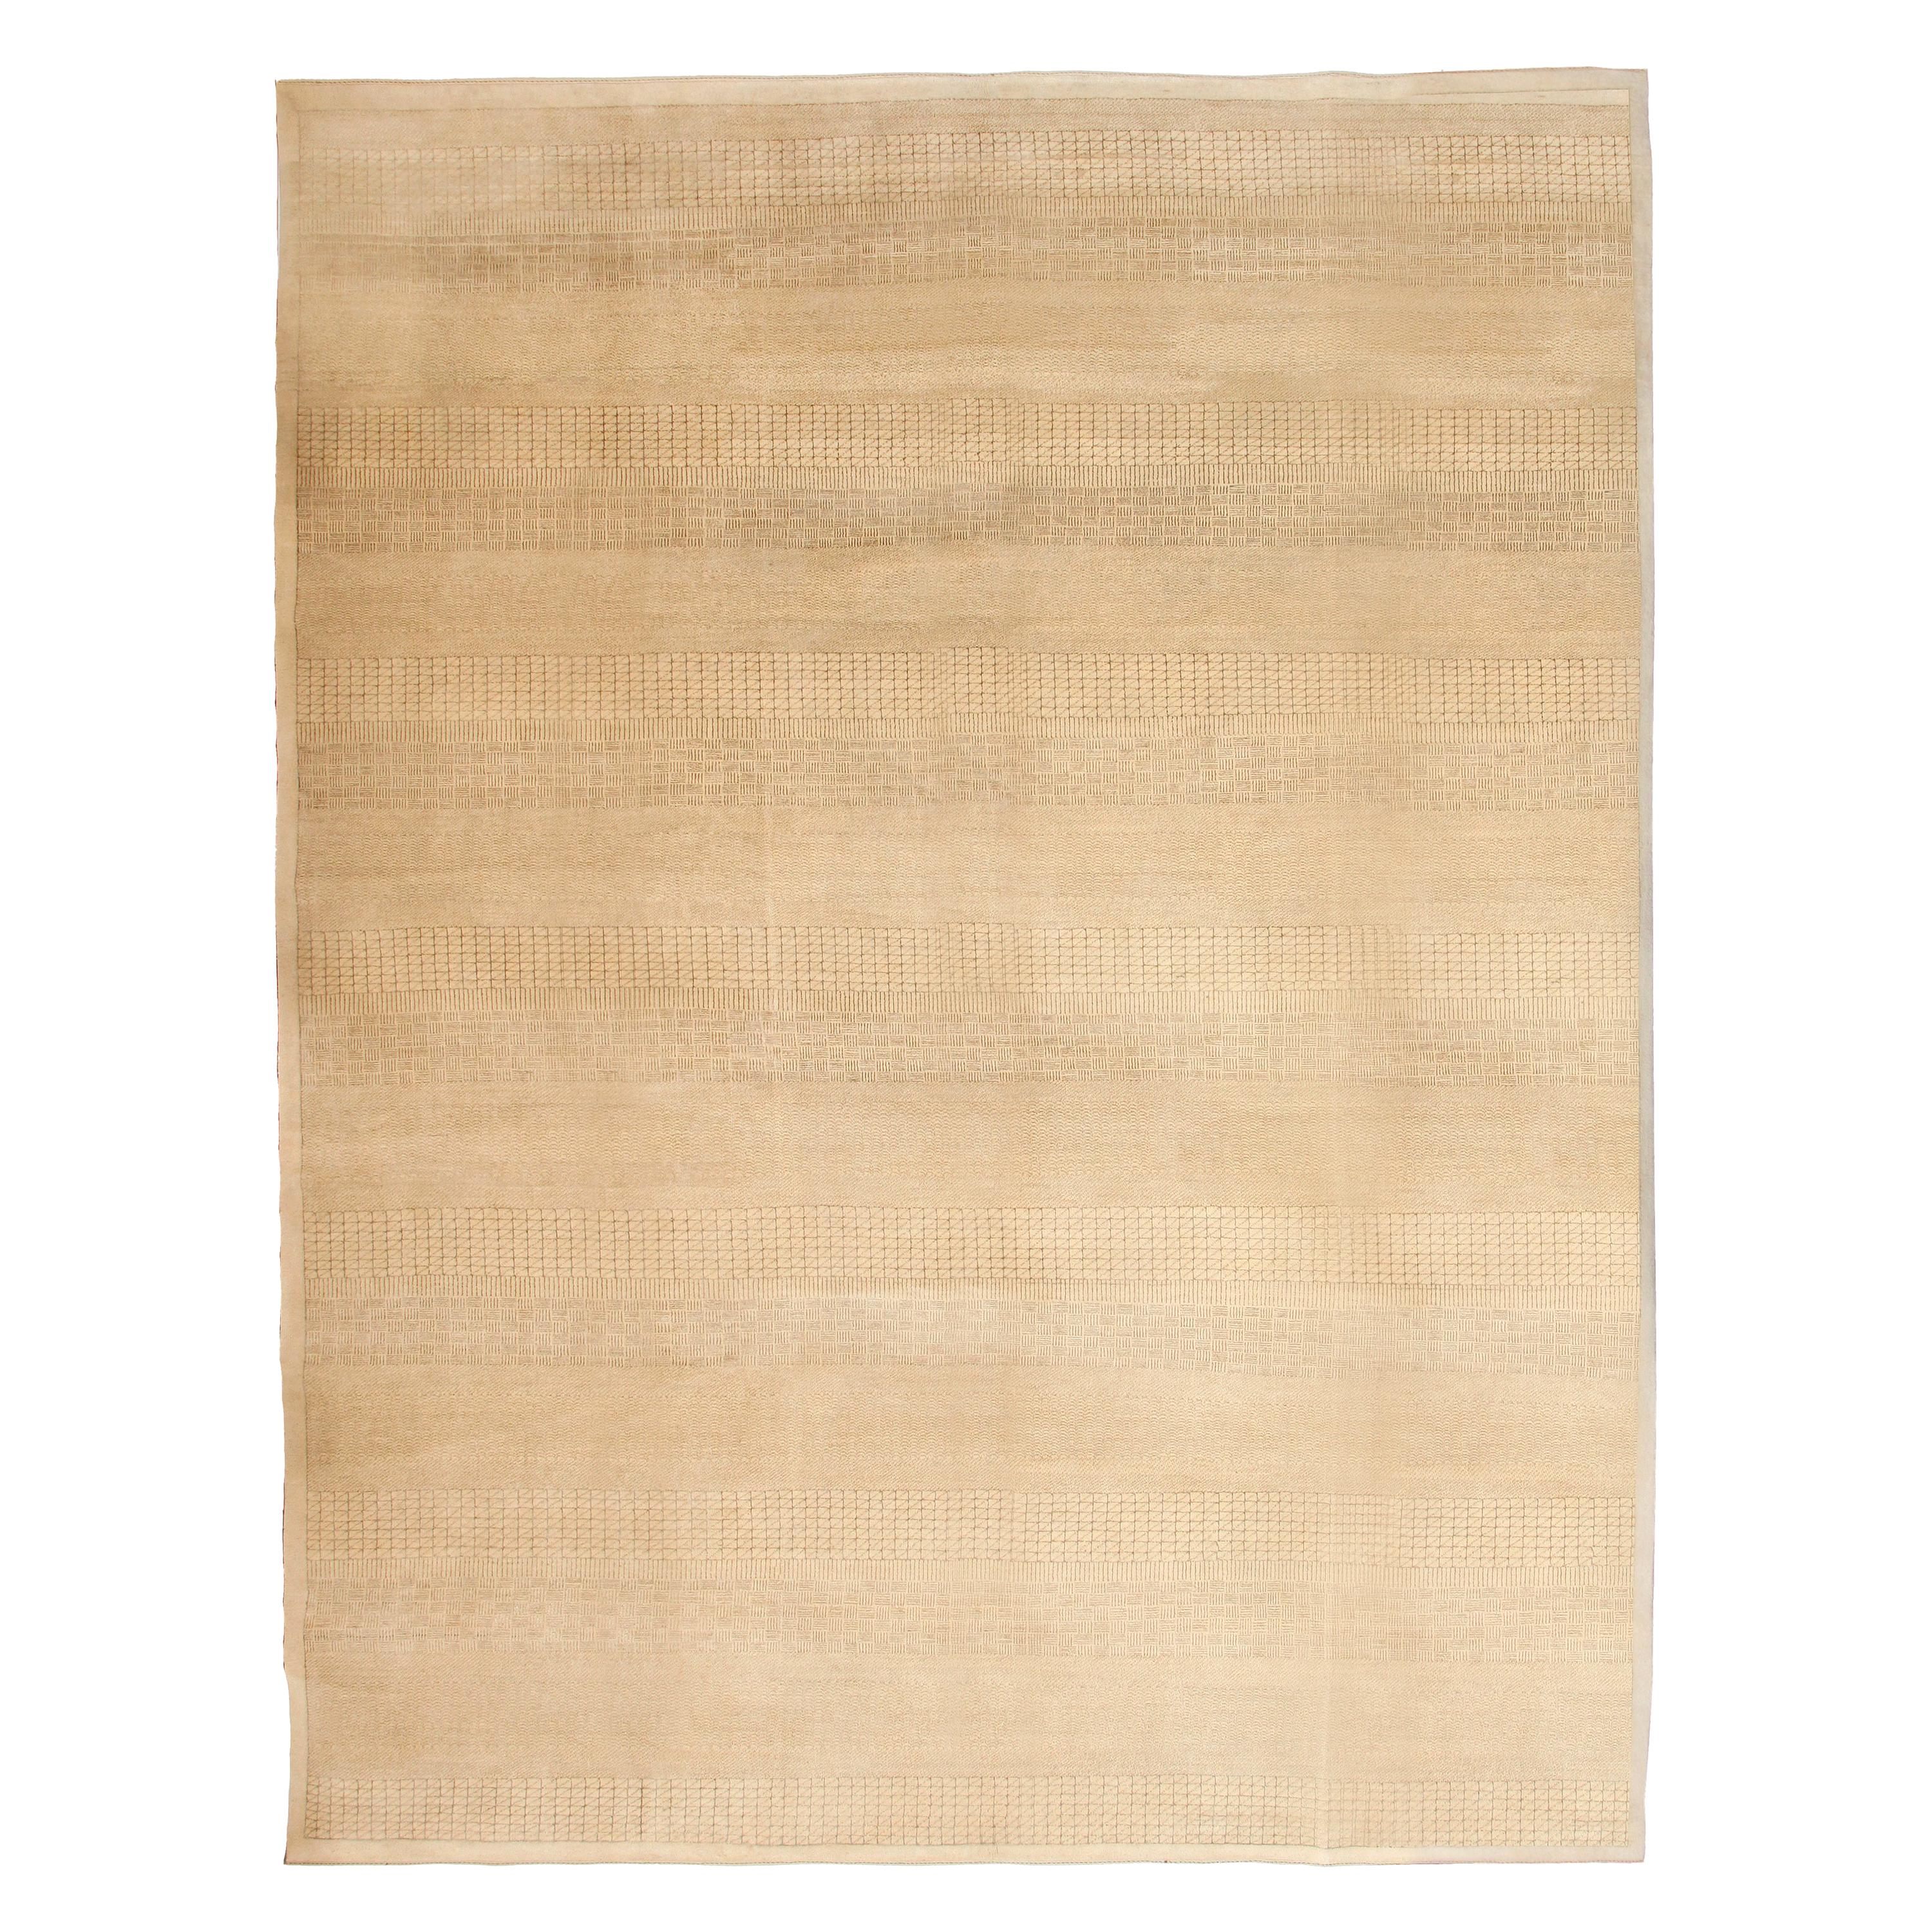 Orley Shabahang "Rain" Contemporary Wool Persian Rug, Neutral Cream, 9' x 12' For Sale